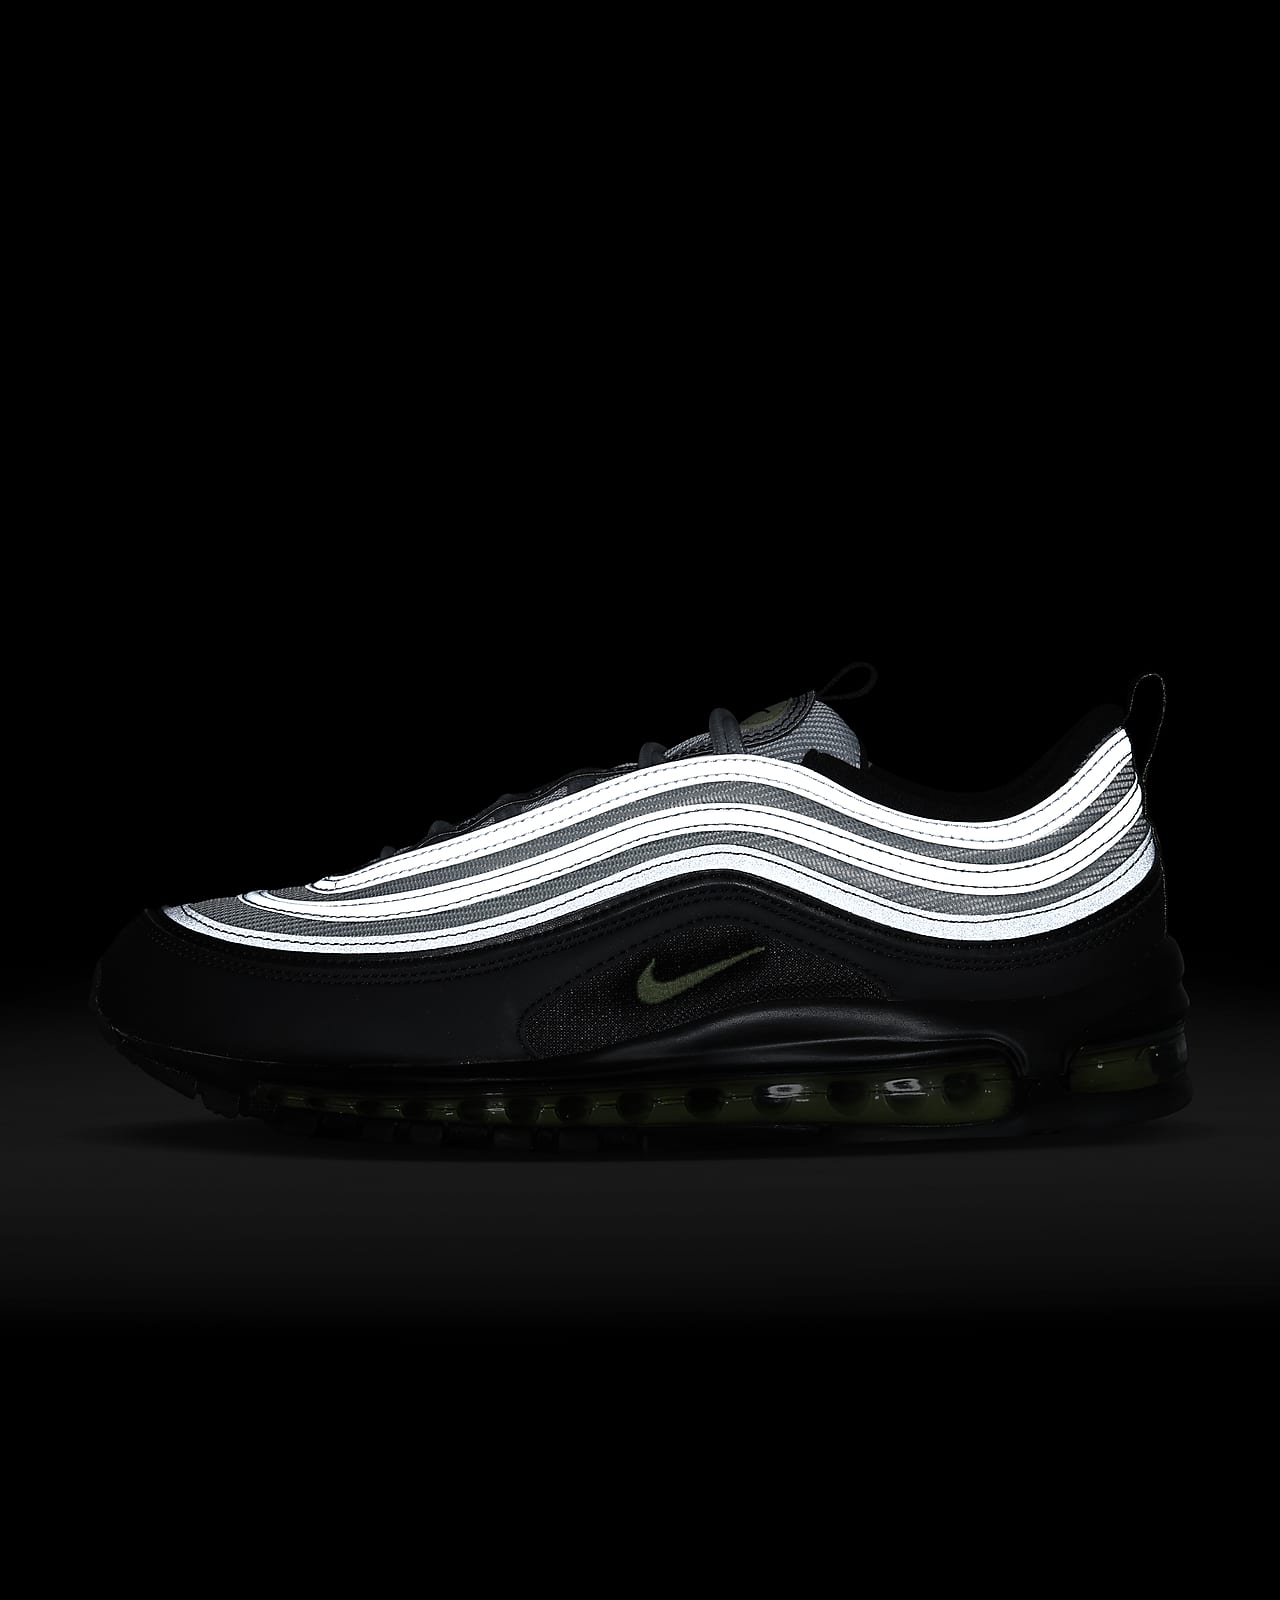 How Does The Nike Air Max 97 Fit And Is It True To Size?